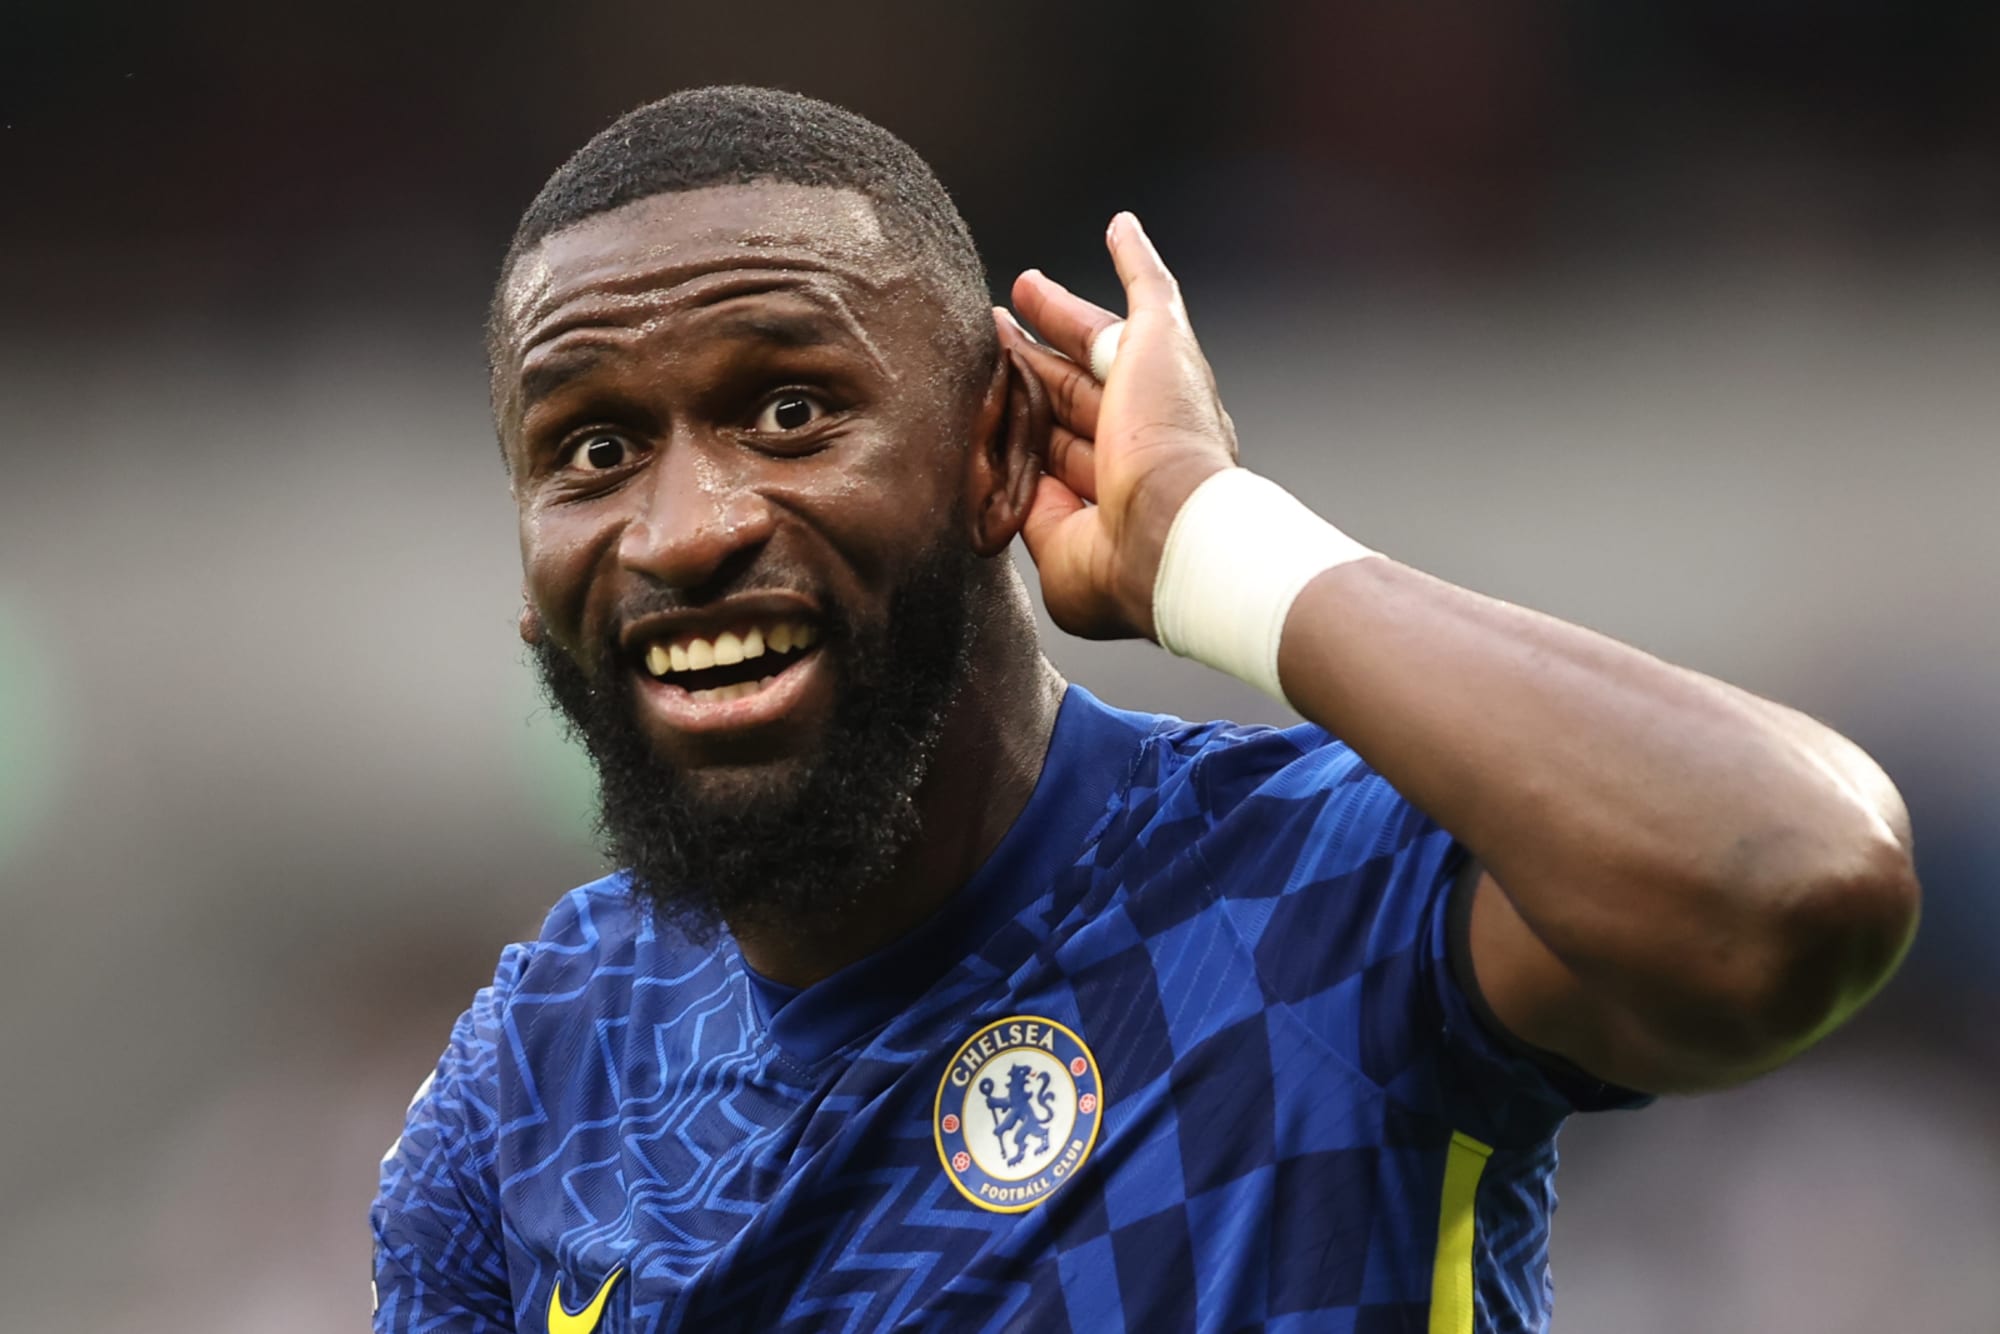 Sierra Leone’s Global Ambassador For Sports, Antonio Rudiger Pens Passionate Article on Racism in Football